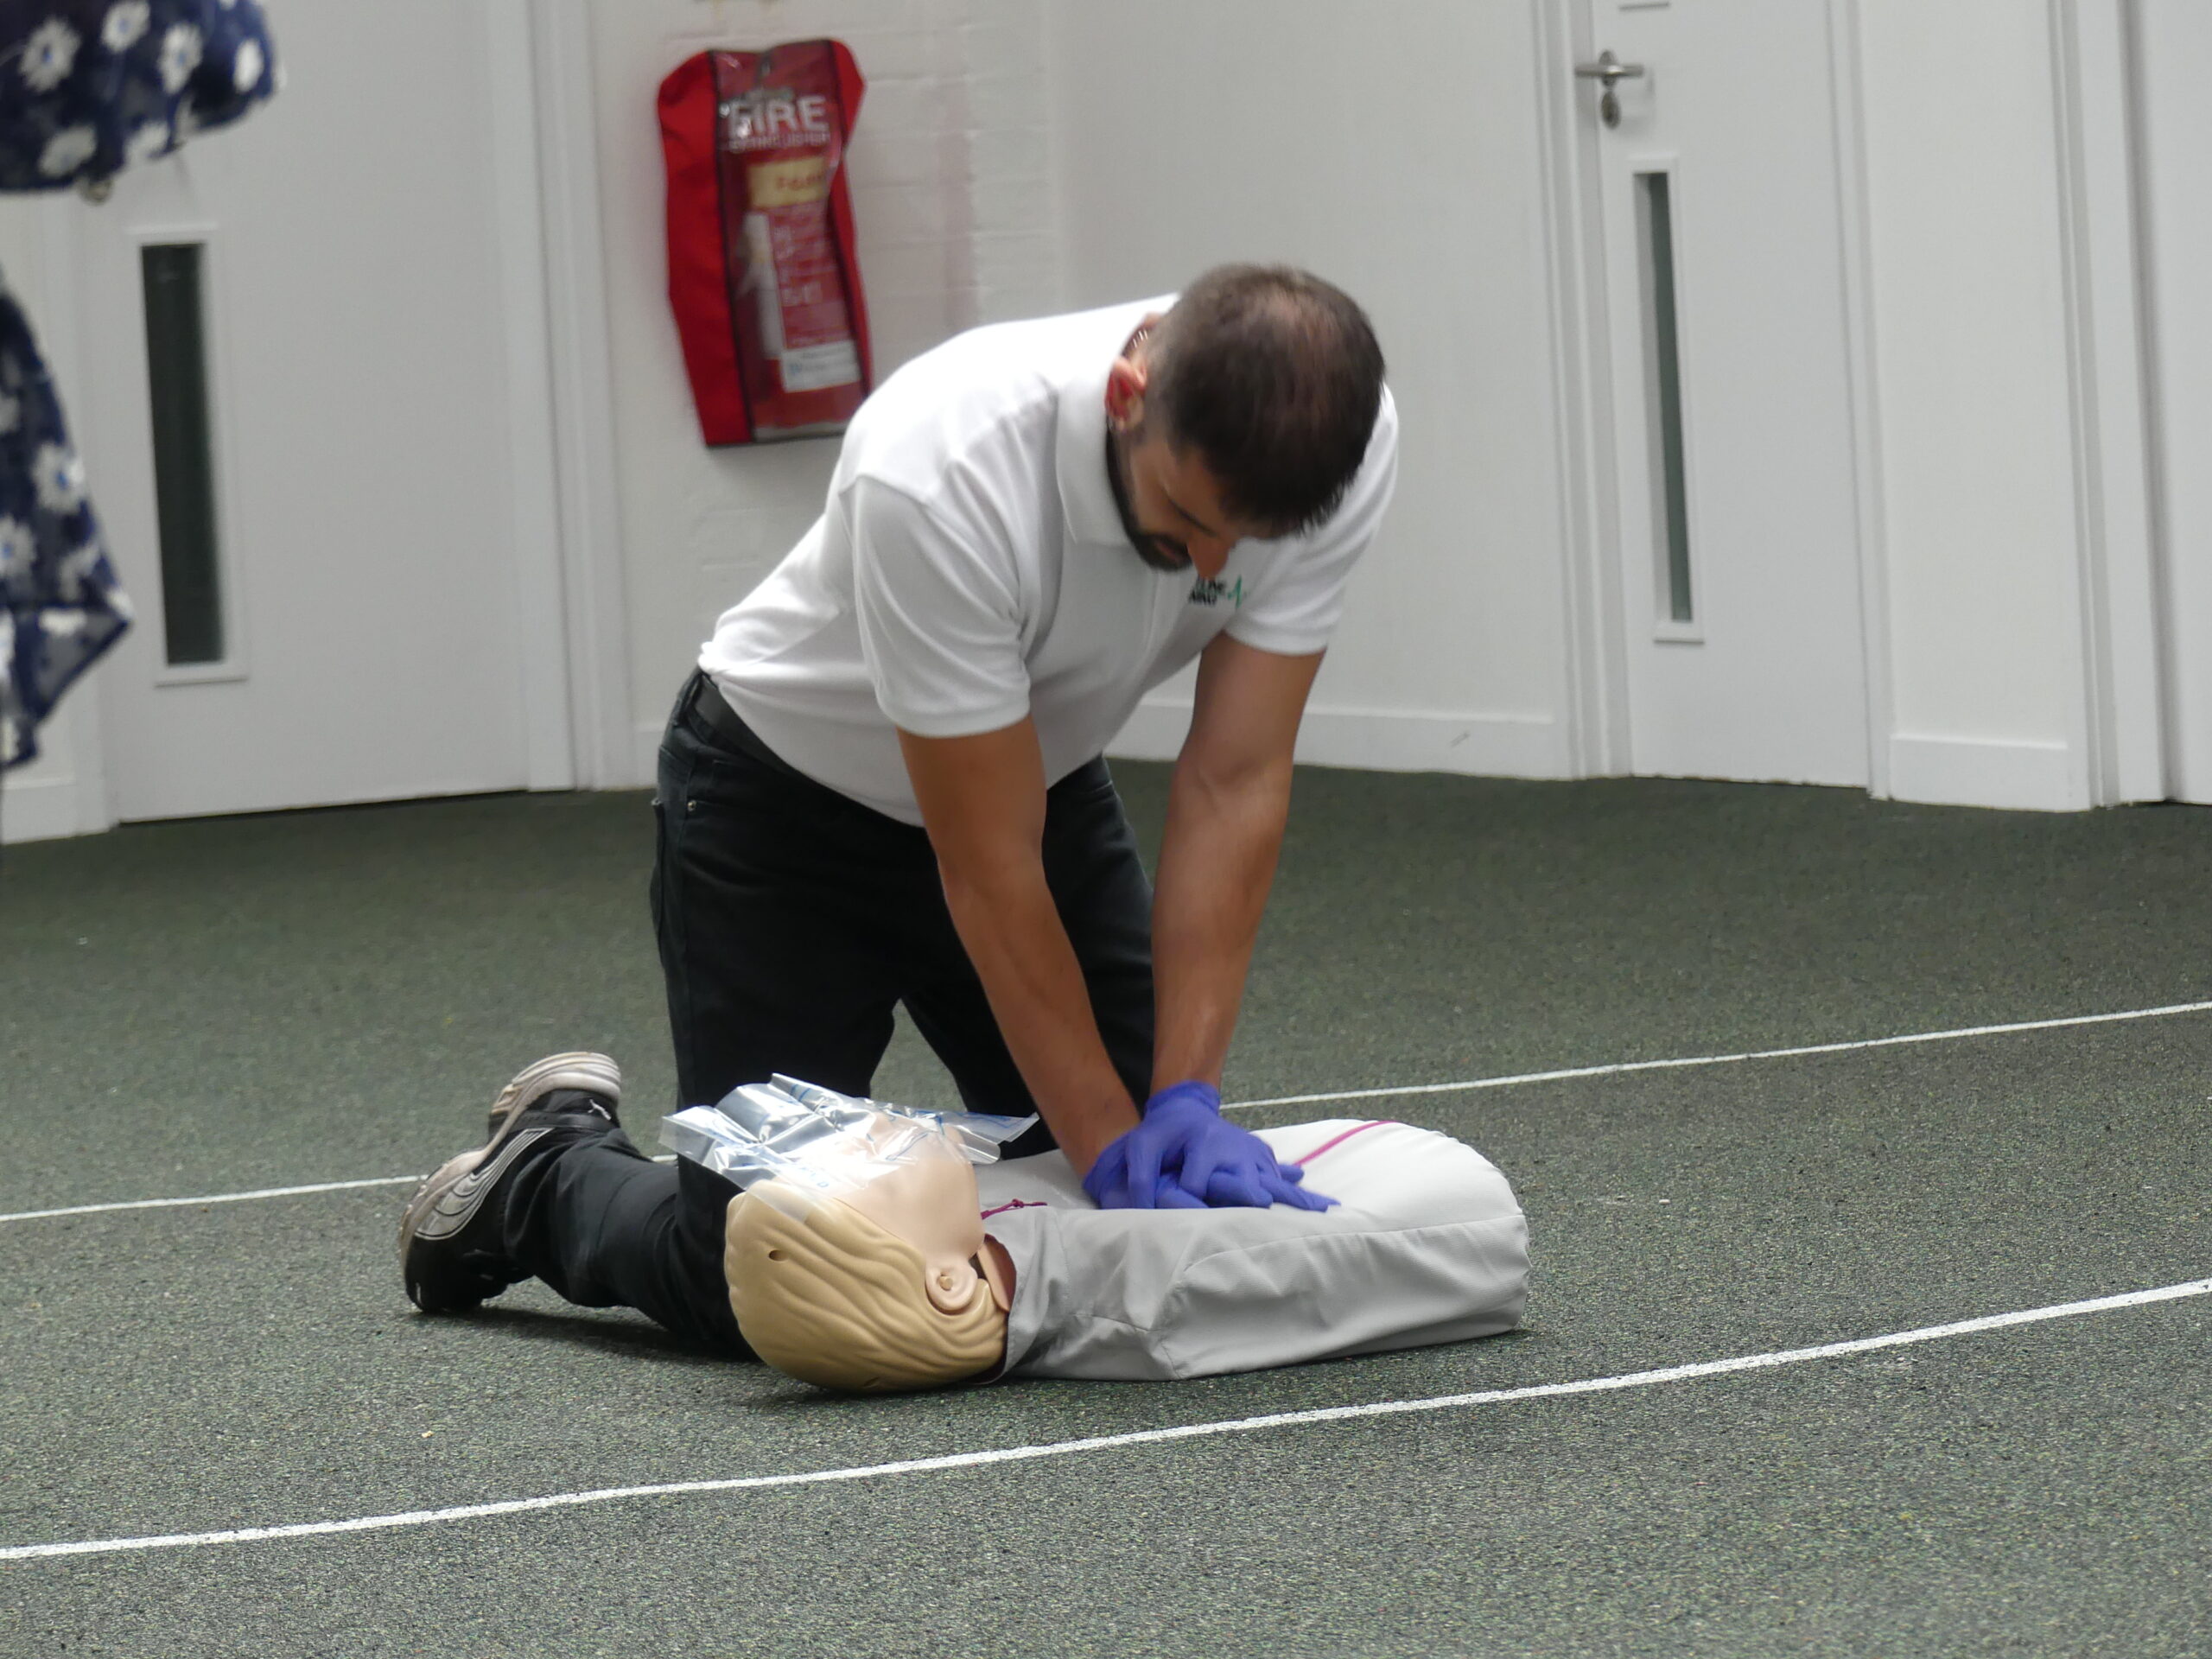 First aid training on CPR